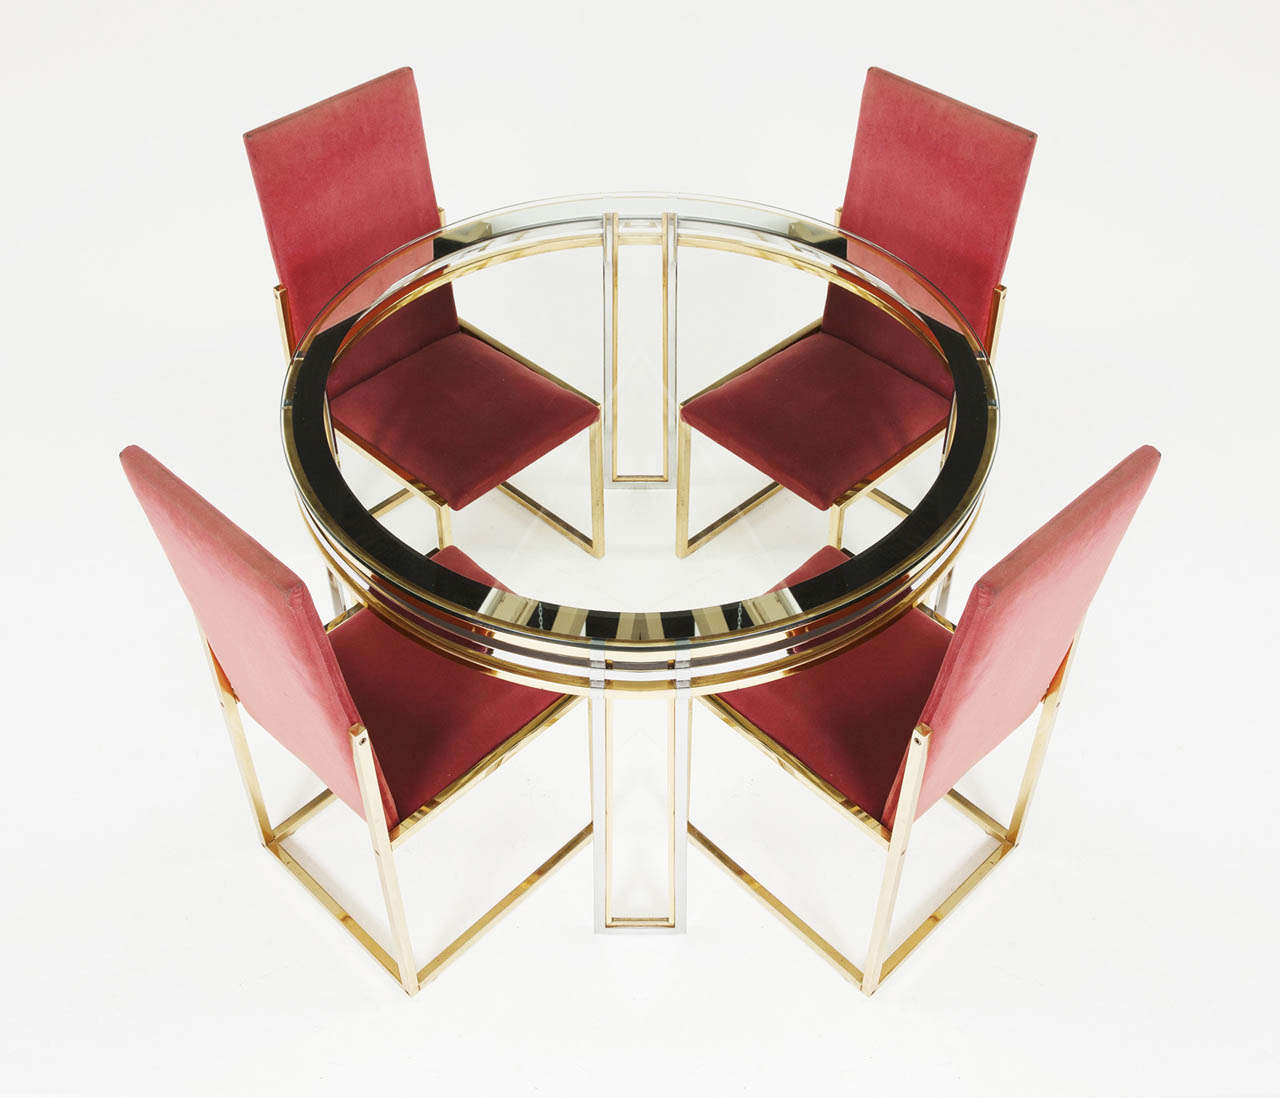 Romeo Rega, dining set, chrome, brass, fabric, Italy, 1960s.

Italian game table in brass and chrome with a set of 4 accompanying chairs designed by Romeo Rega. The brass and chrome have some signs of age and use, but overall very nice expression.